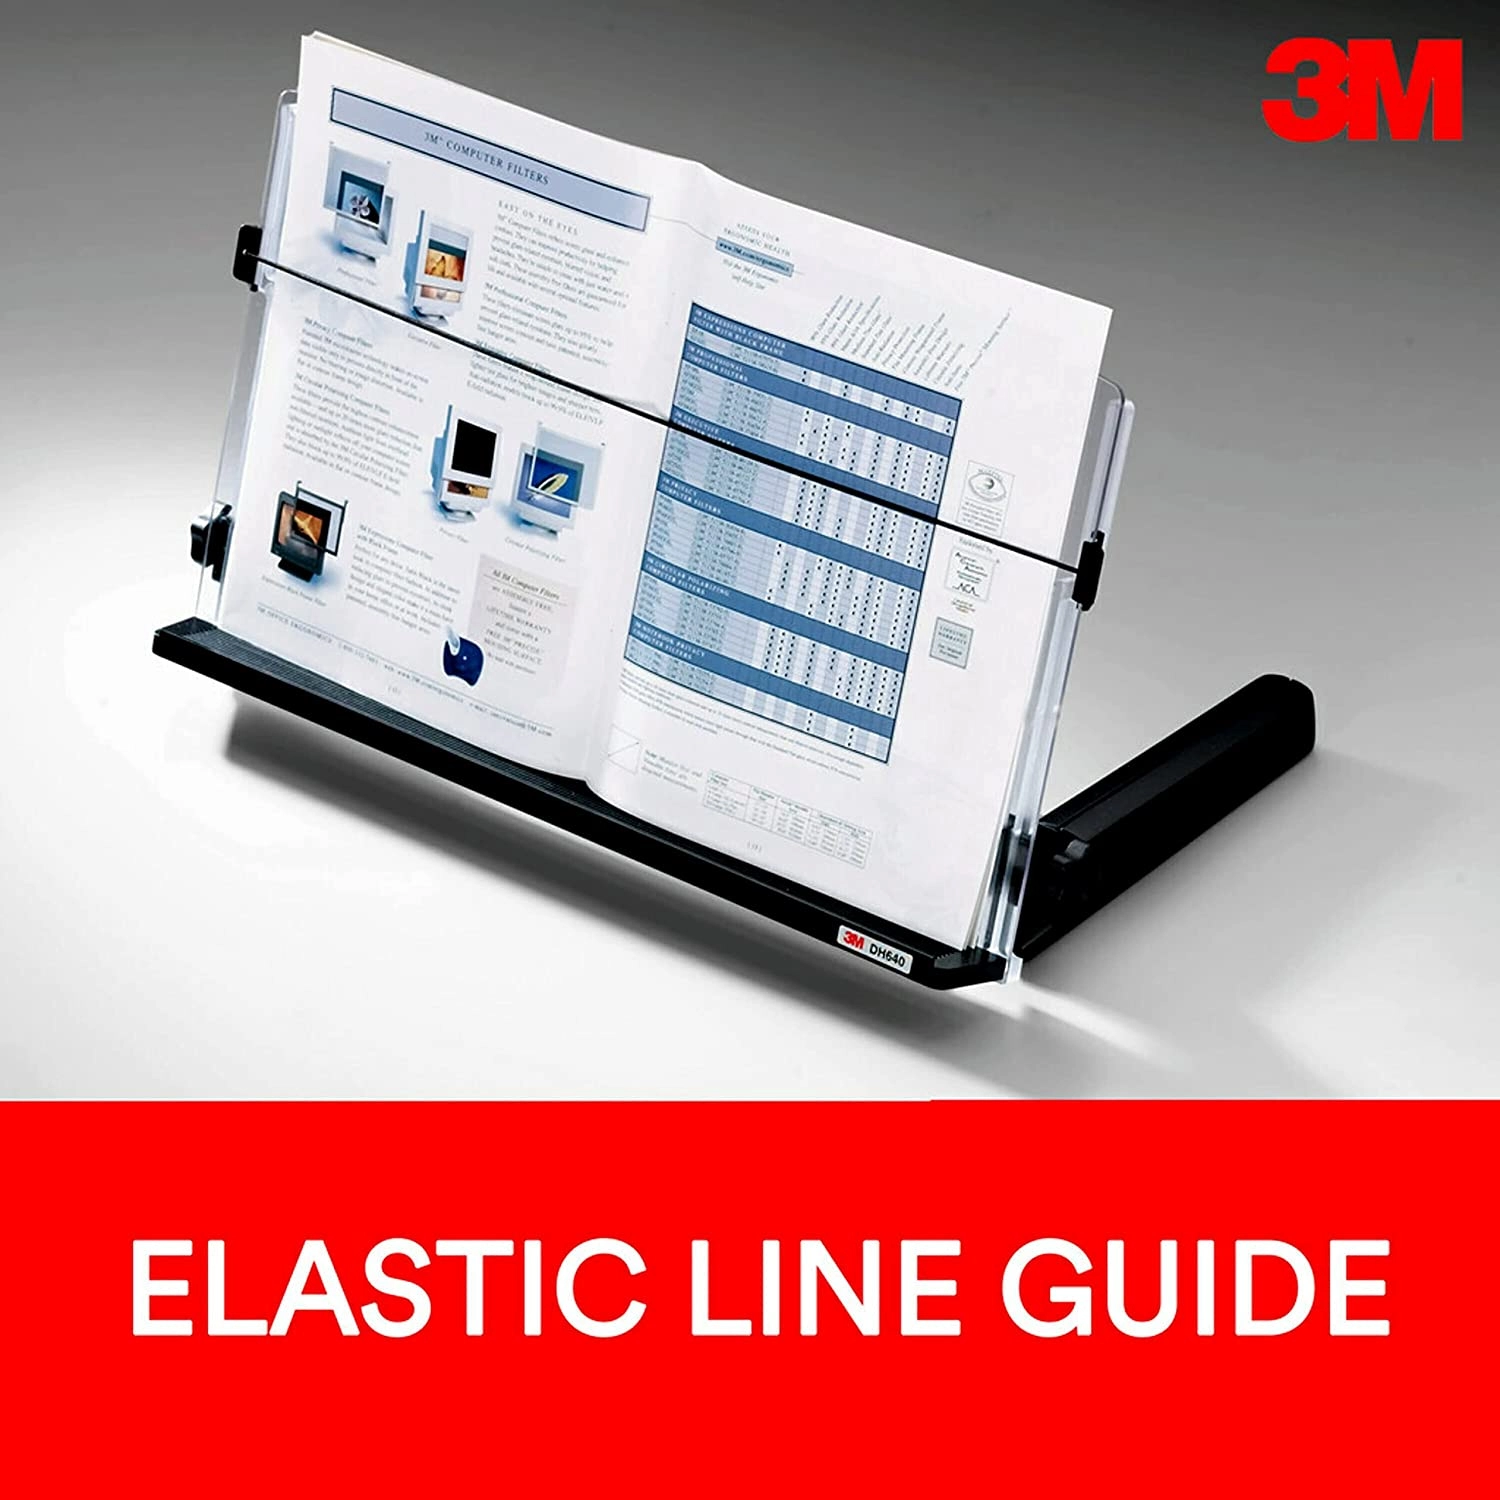 3M A3 Document Holder (DH640MB)